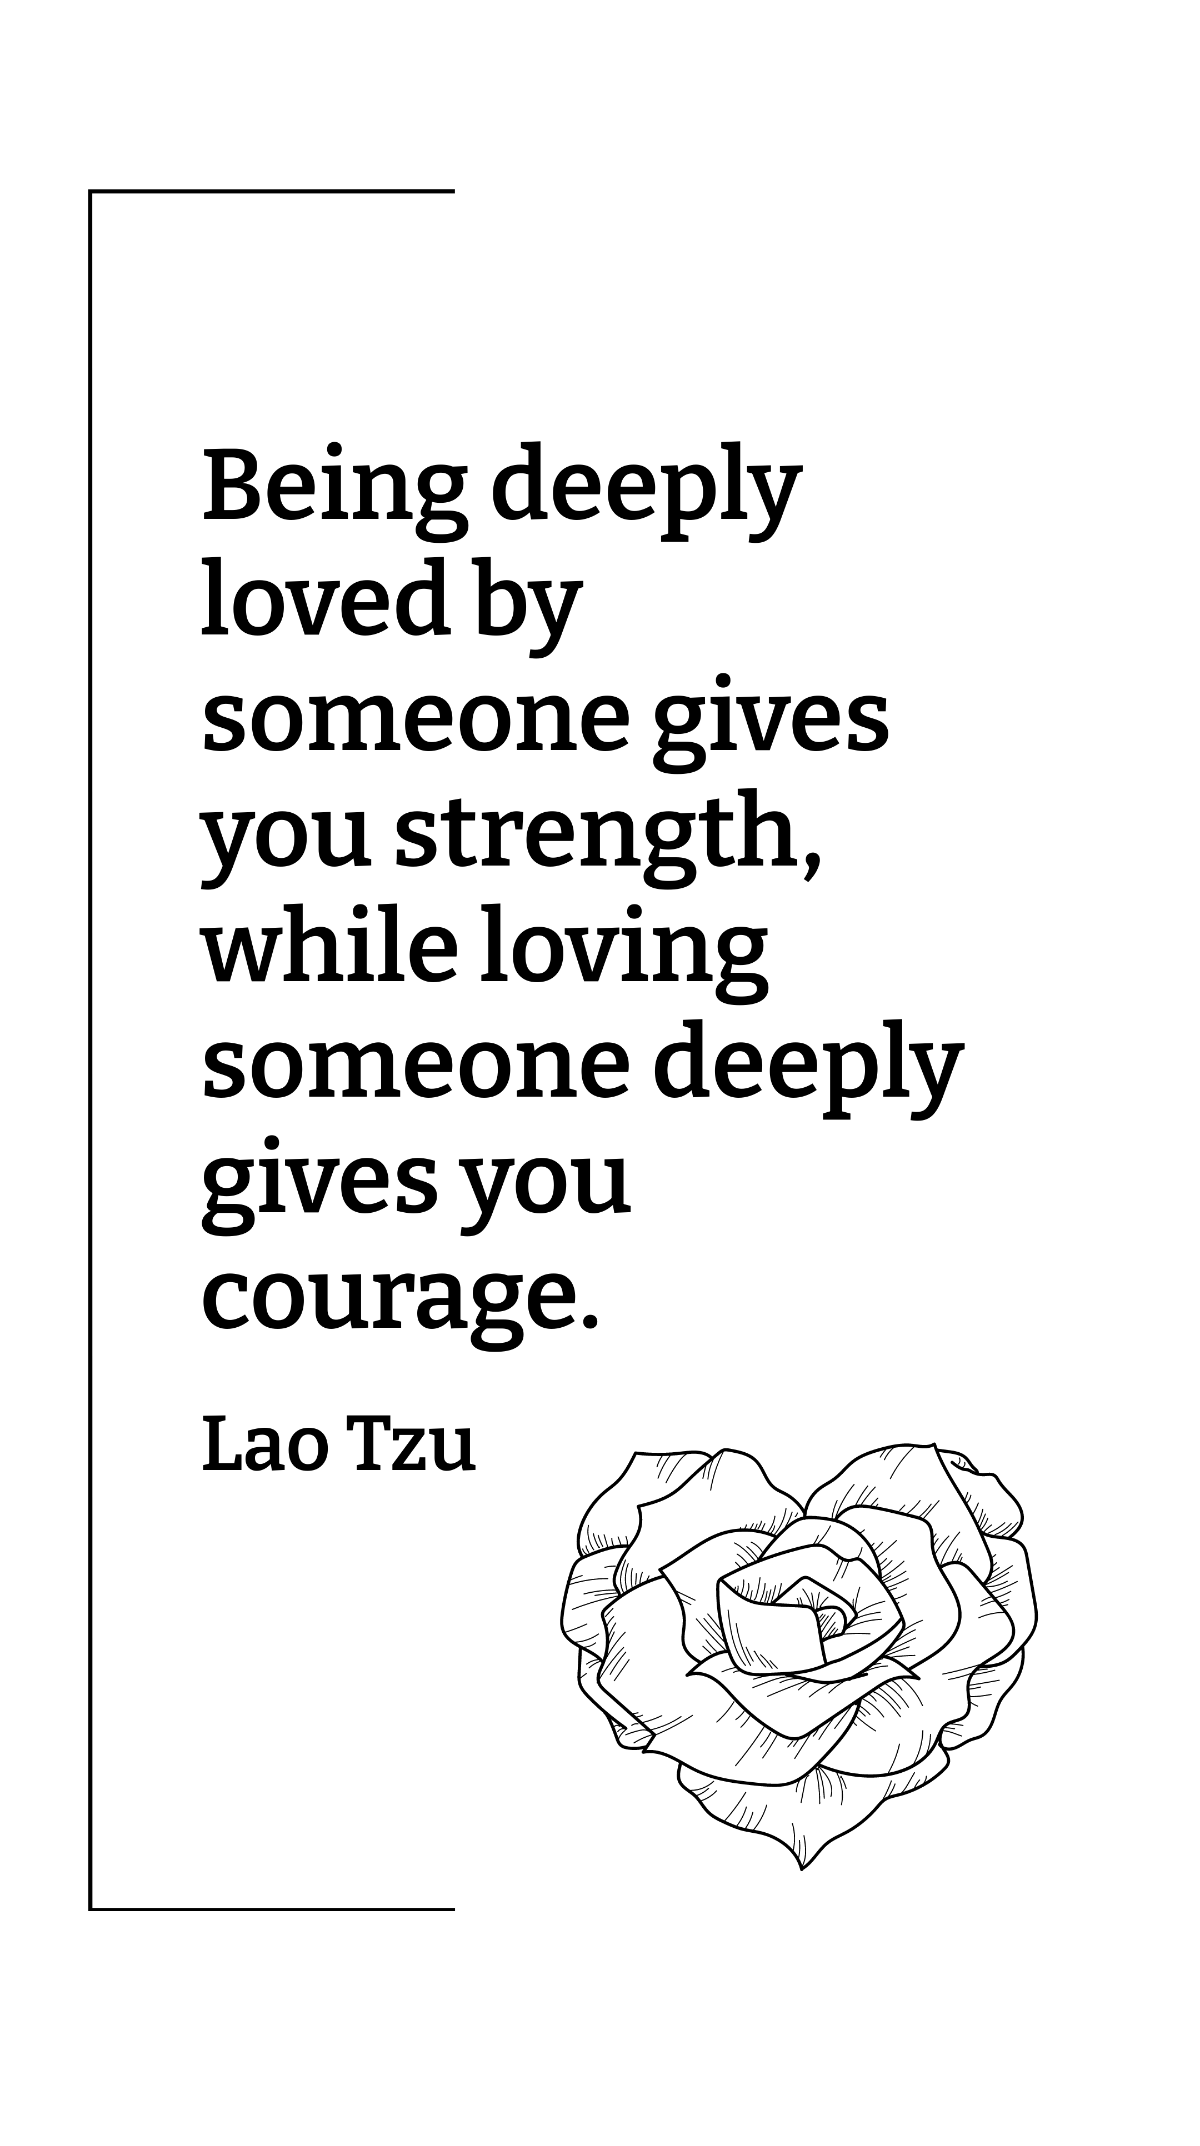 Lao Tzu - Being deeply loved by someone gives you strength, while loving someone deeply gives you courage. Template